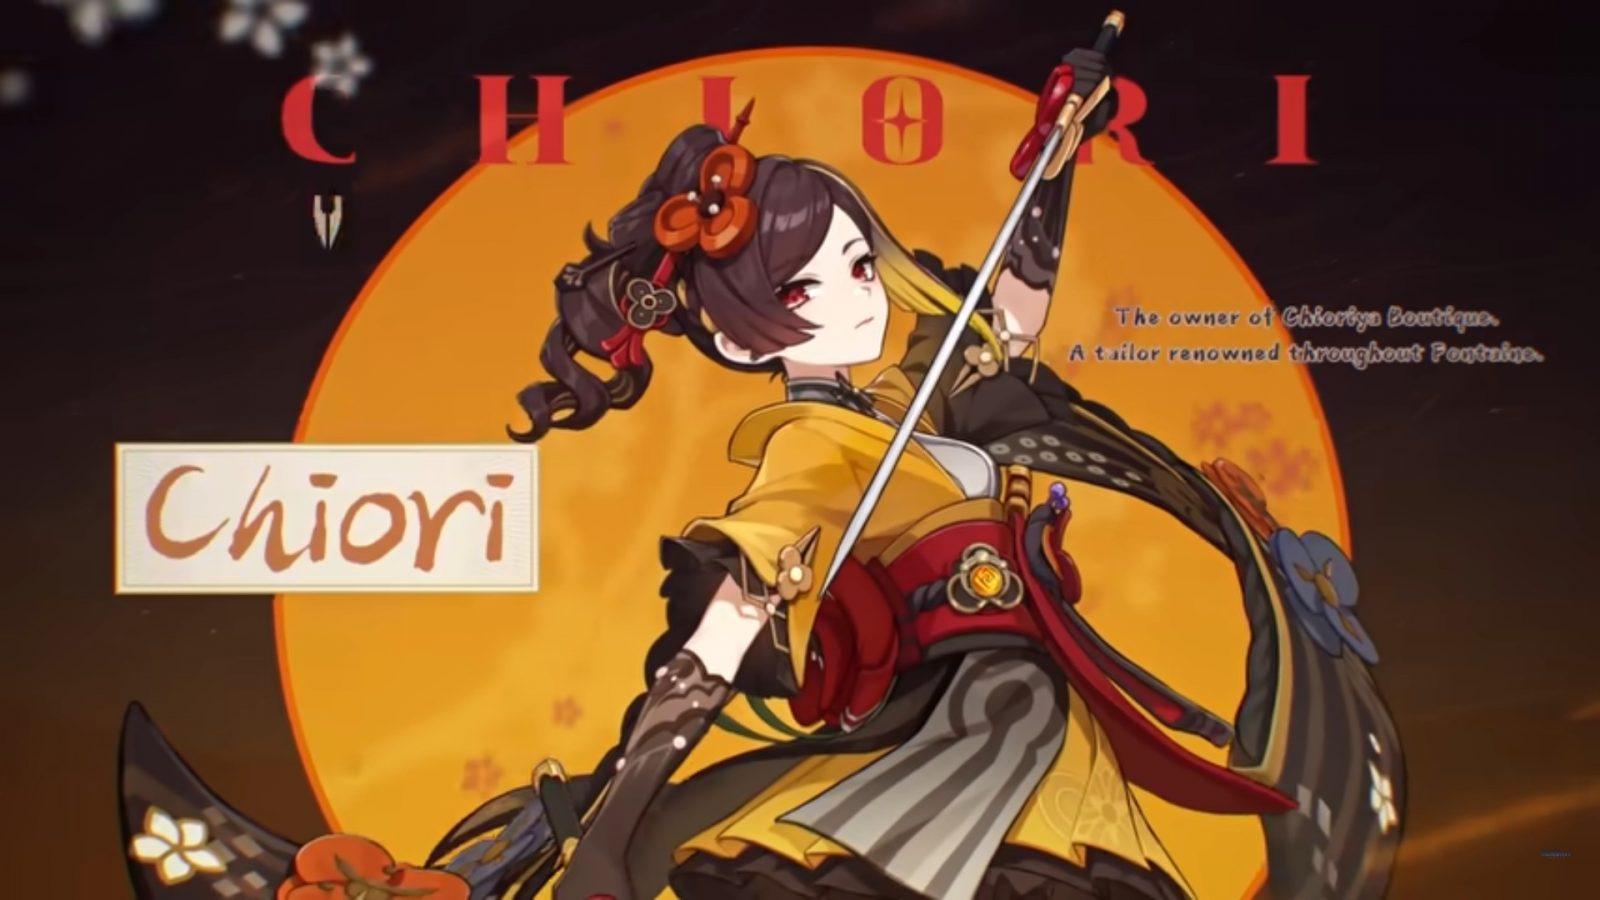 A screenshot of Chiori from the trailer